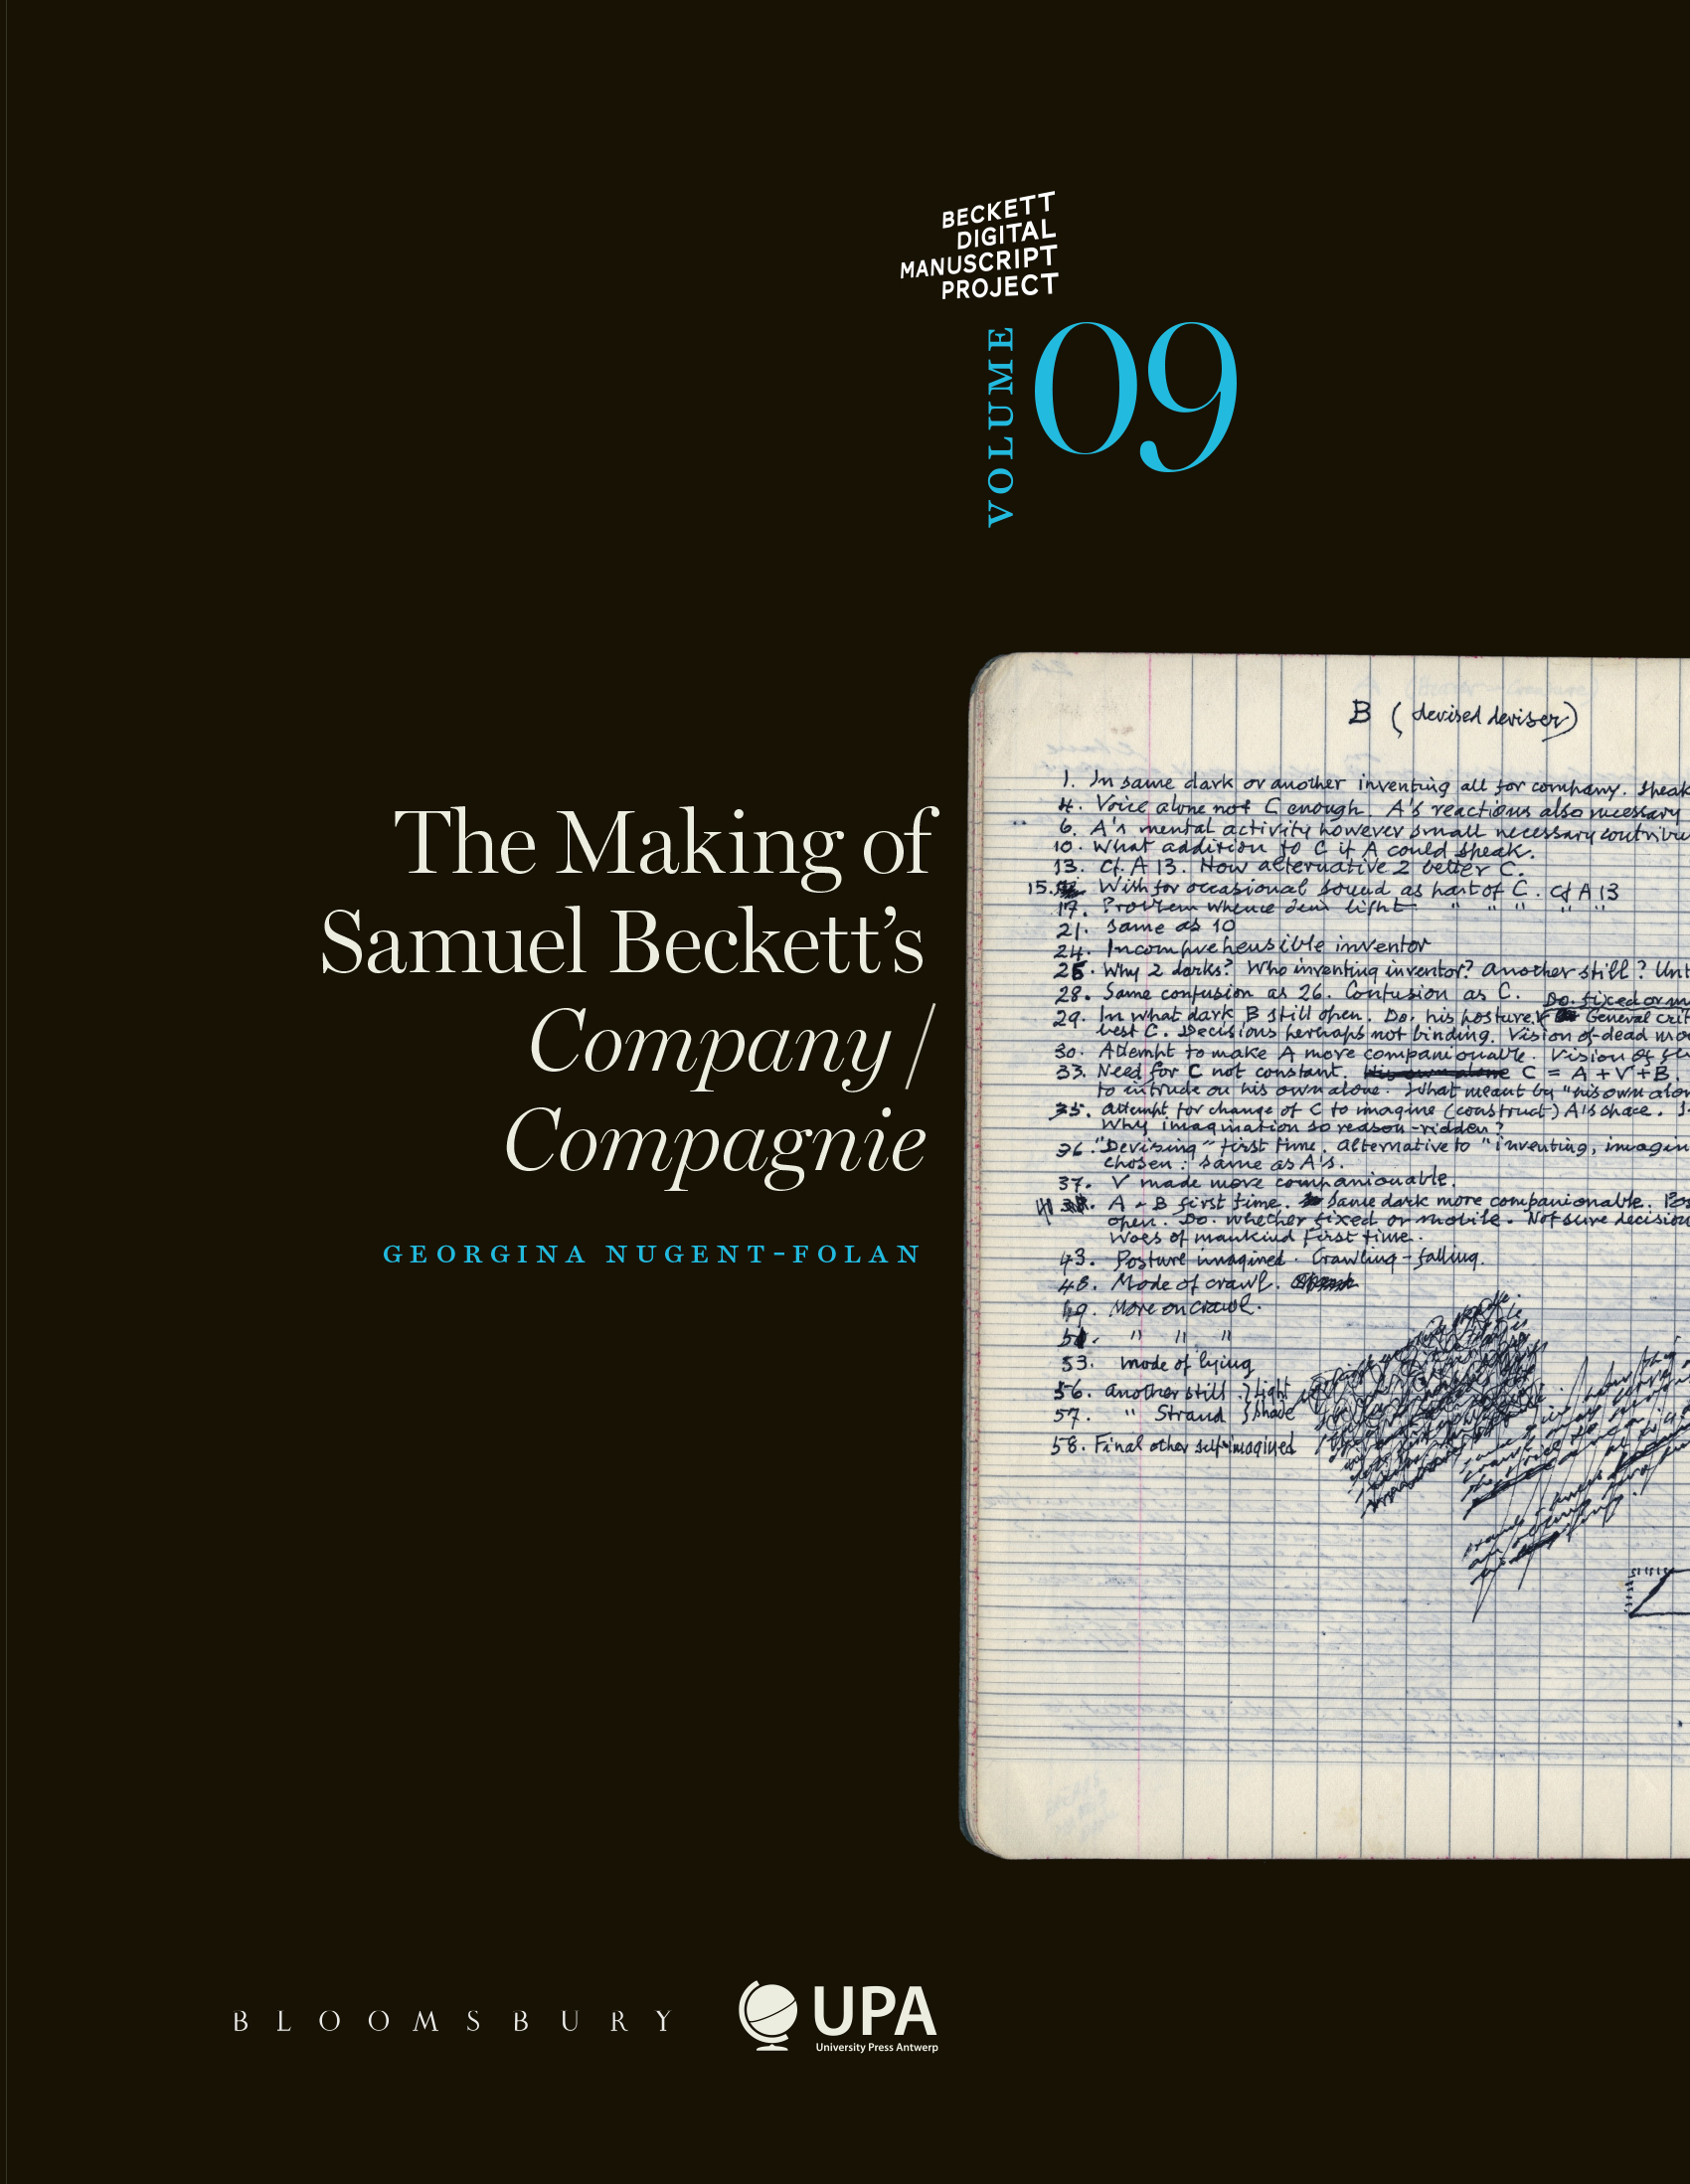 THE MAKING OF SAMUEL BECKETT’S COMPANY / COMPAGNIE